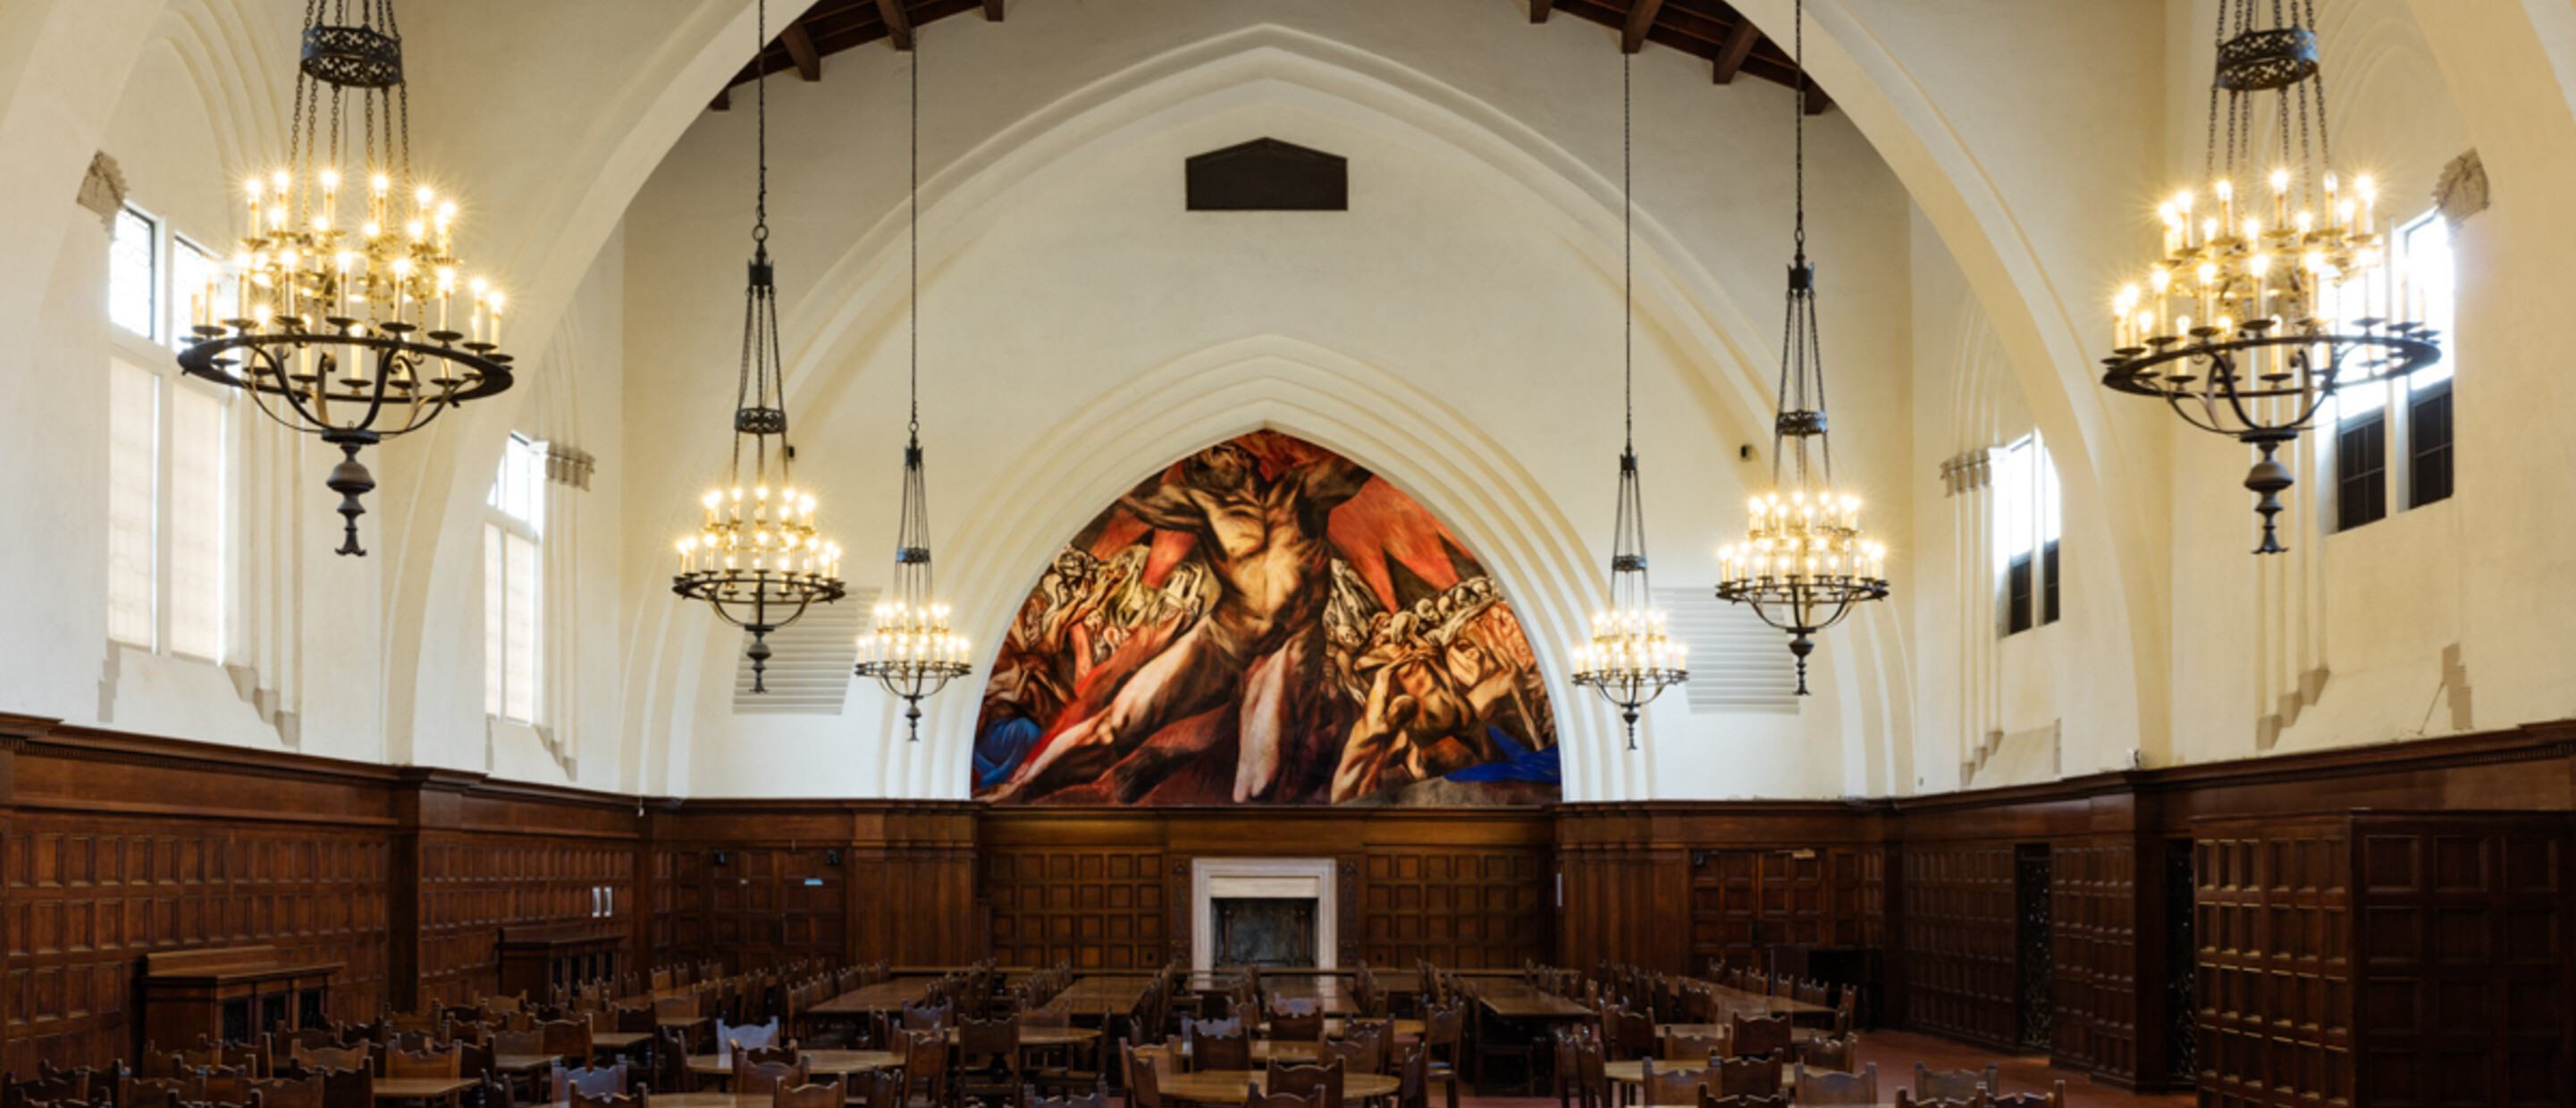 Mural in a dining hall illustrating figure of Prometheus framed within an arch